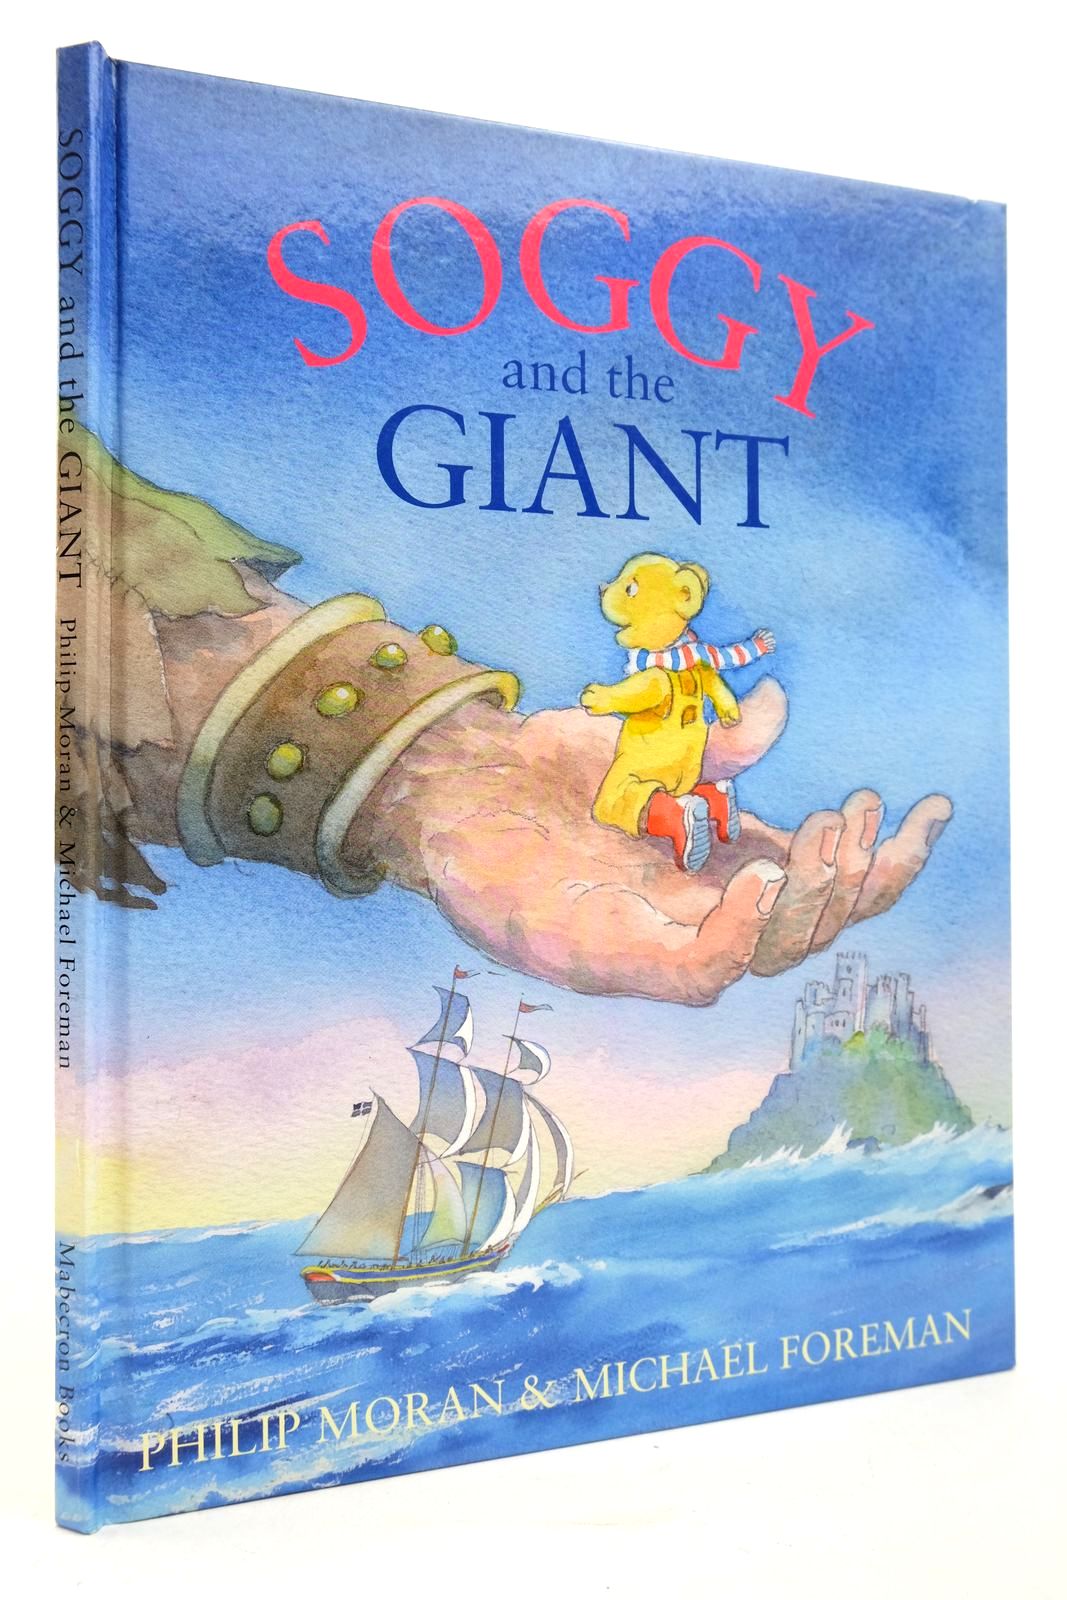 Photo of SOGGY AND THE GIANT written by Moran, Philip illustrated by Foreman, Michael published by Mabecron Books (STOCK CODE: 2140850)  for sale by Stella & Rose's Books